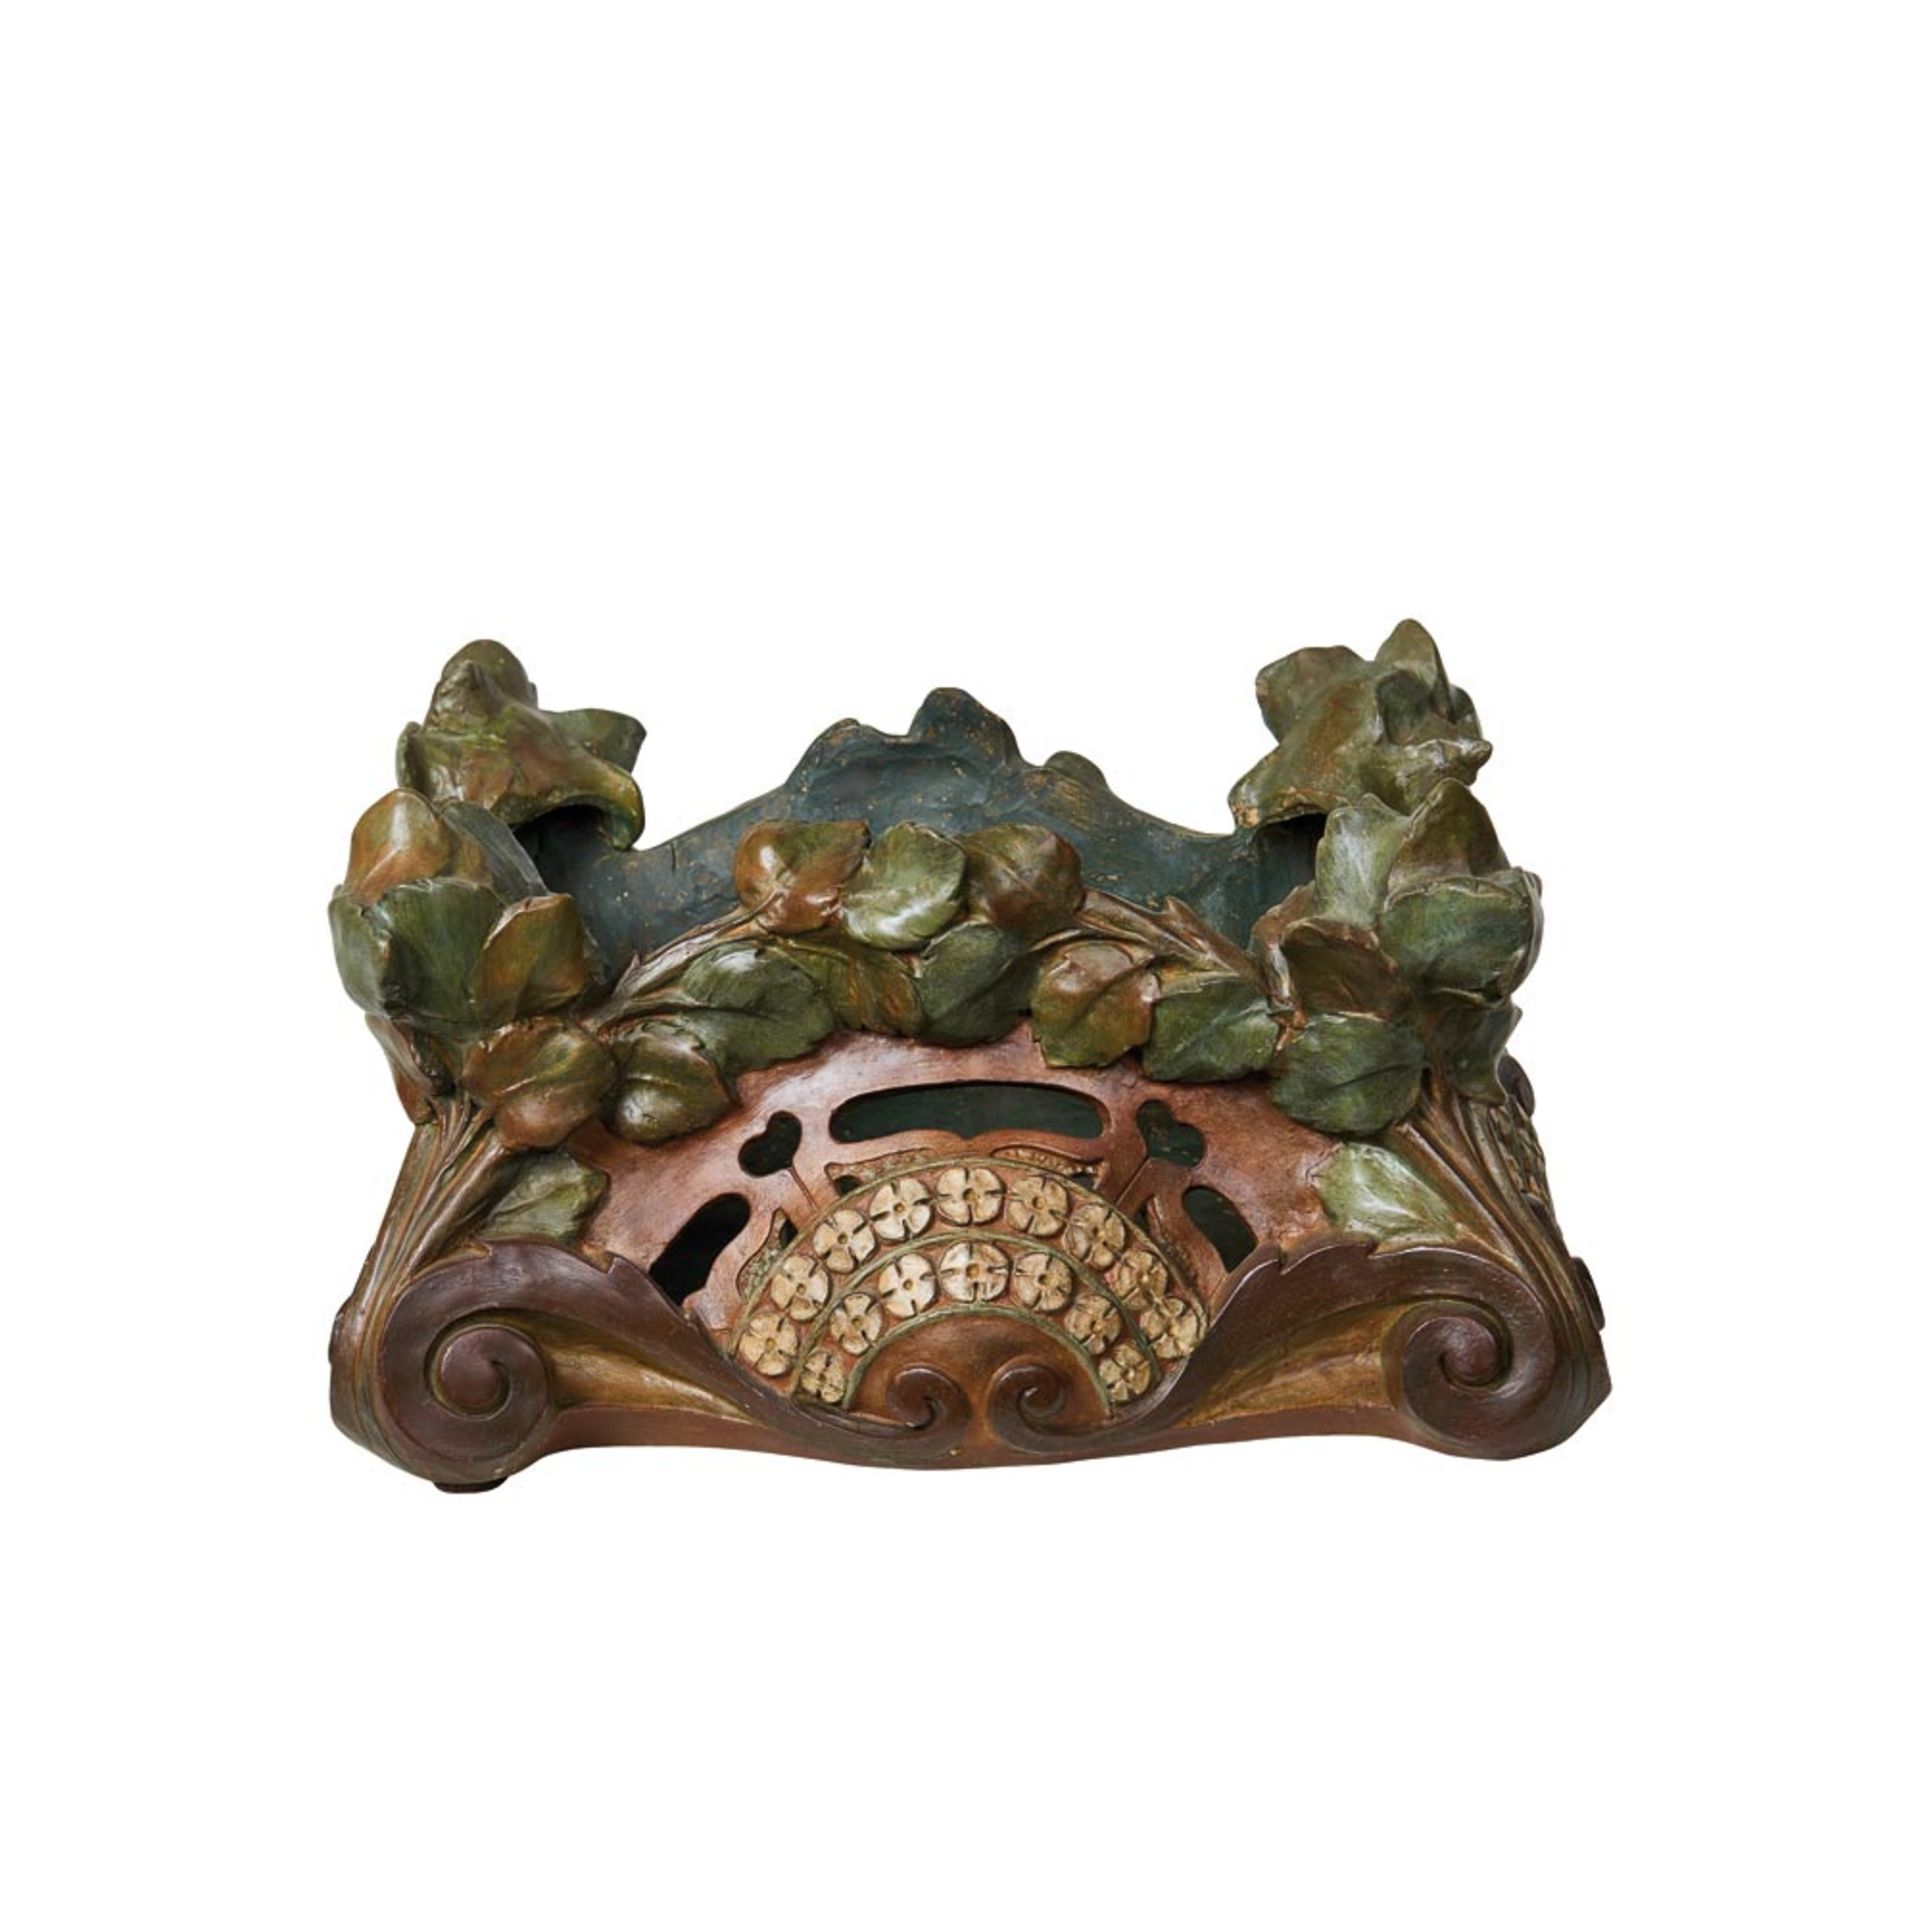 French Art Nouveau polychrome terracotta jardiniere, early 20th century